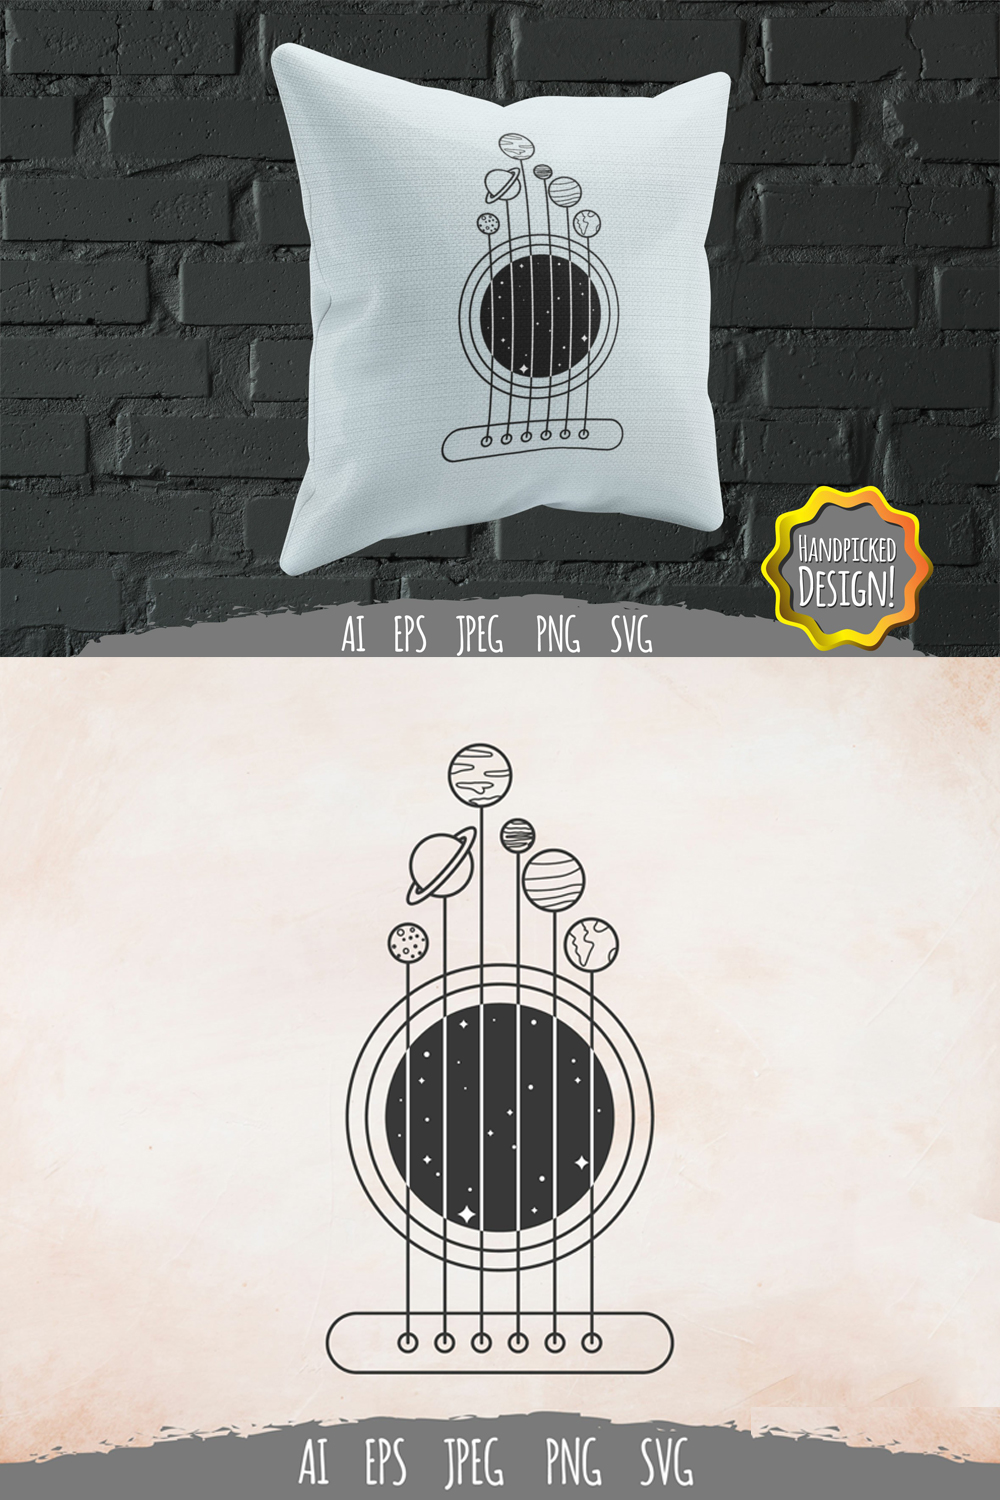 Unique stylization of things with a guitar string.